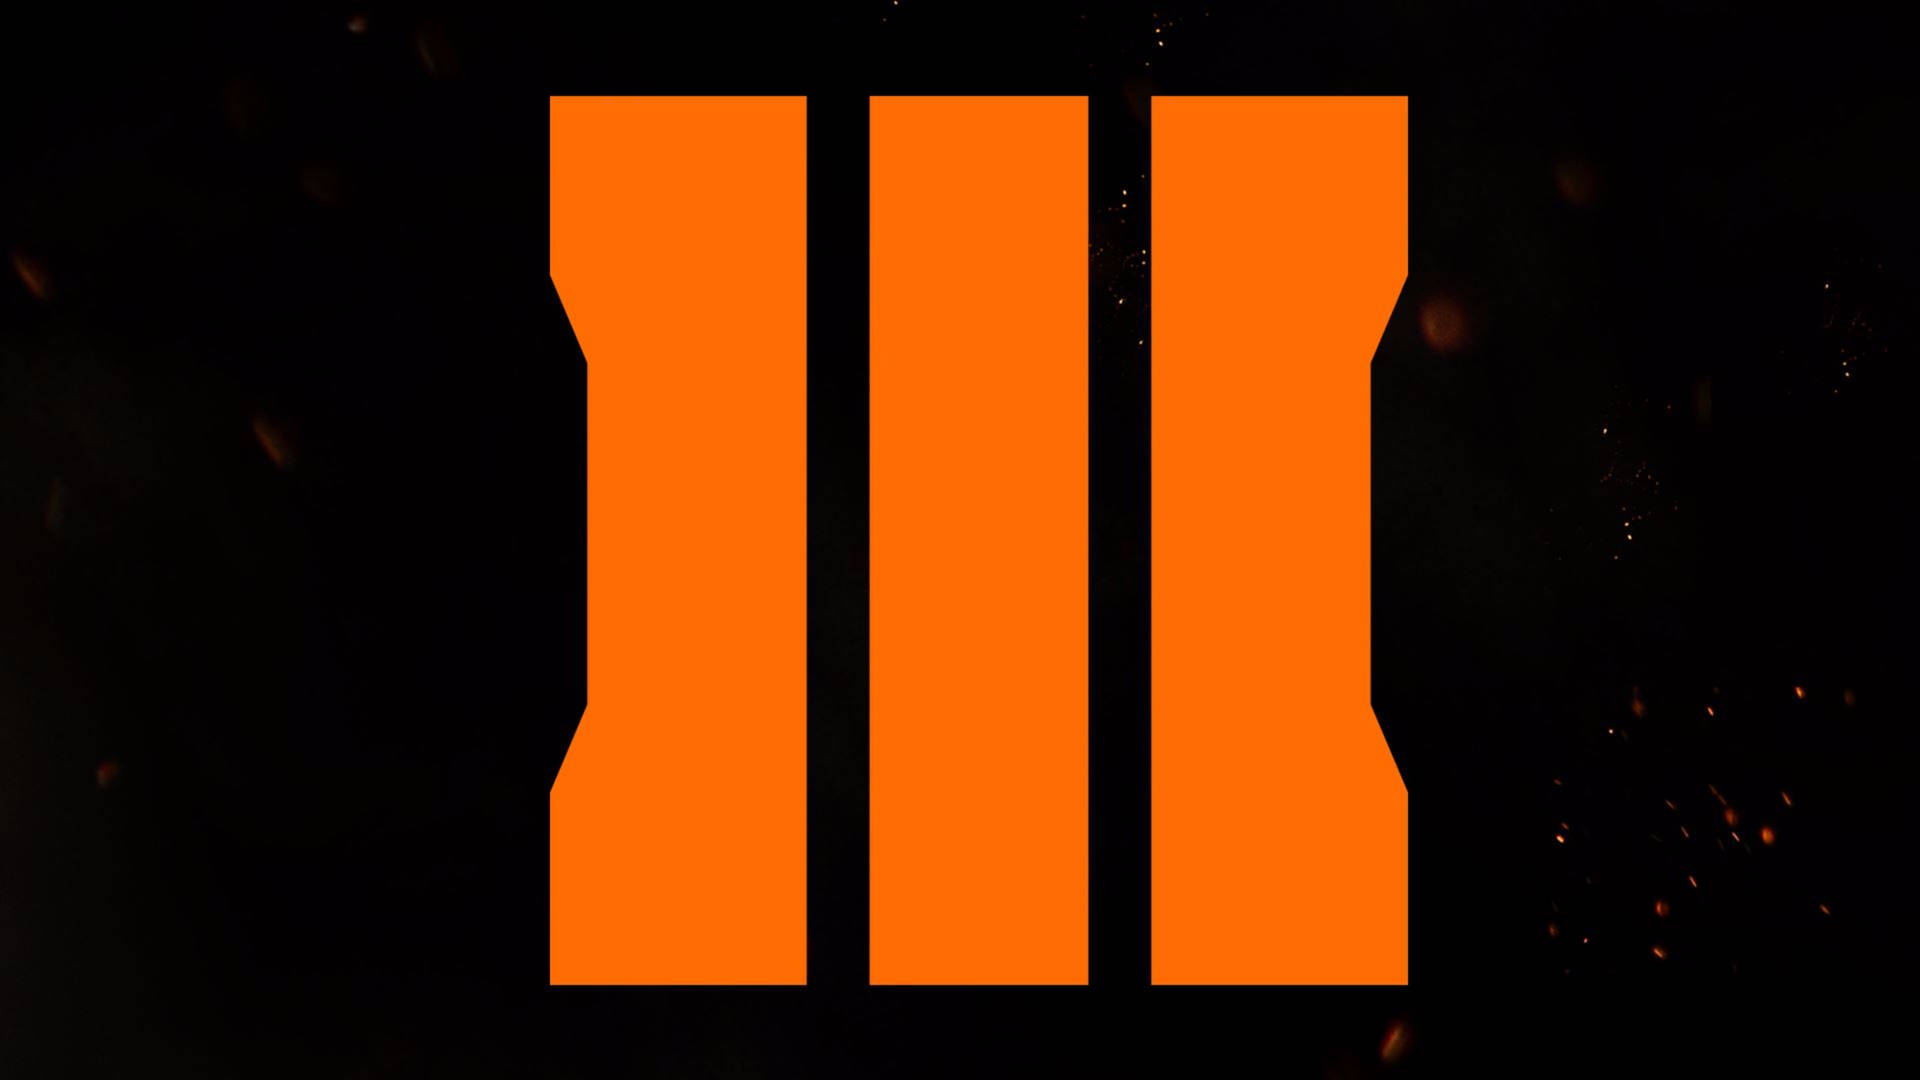 Free Call Of Duty Black Ops 3 Wallpaper Downloads, [100+] Call Of Duty  Black Ops 3 Wallpapers for FREE 